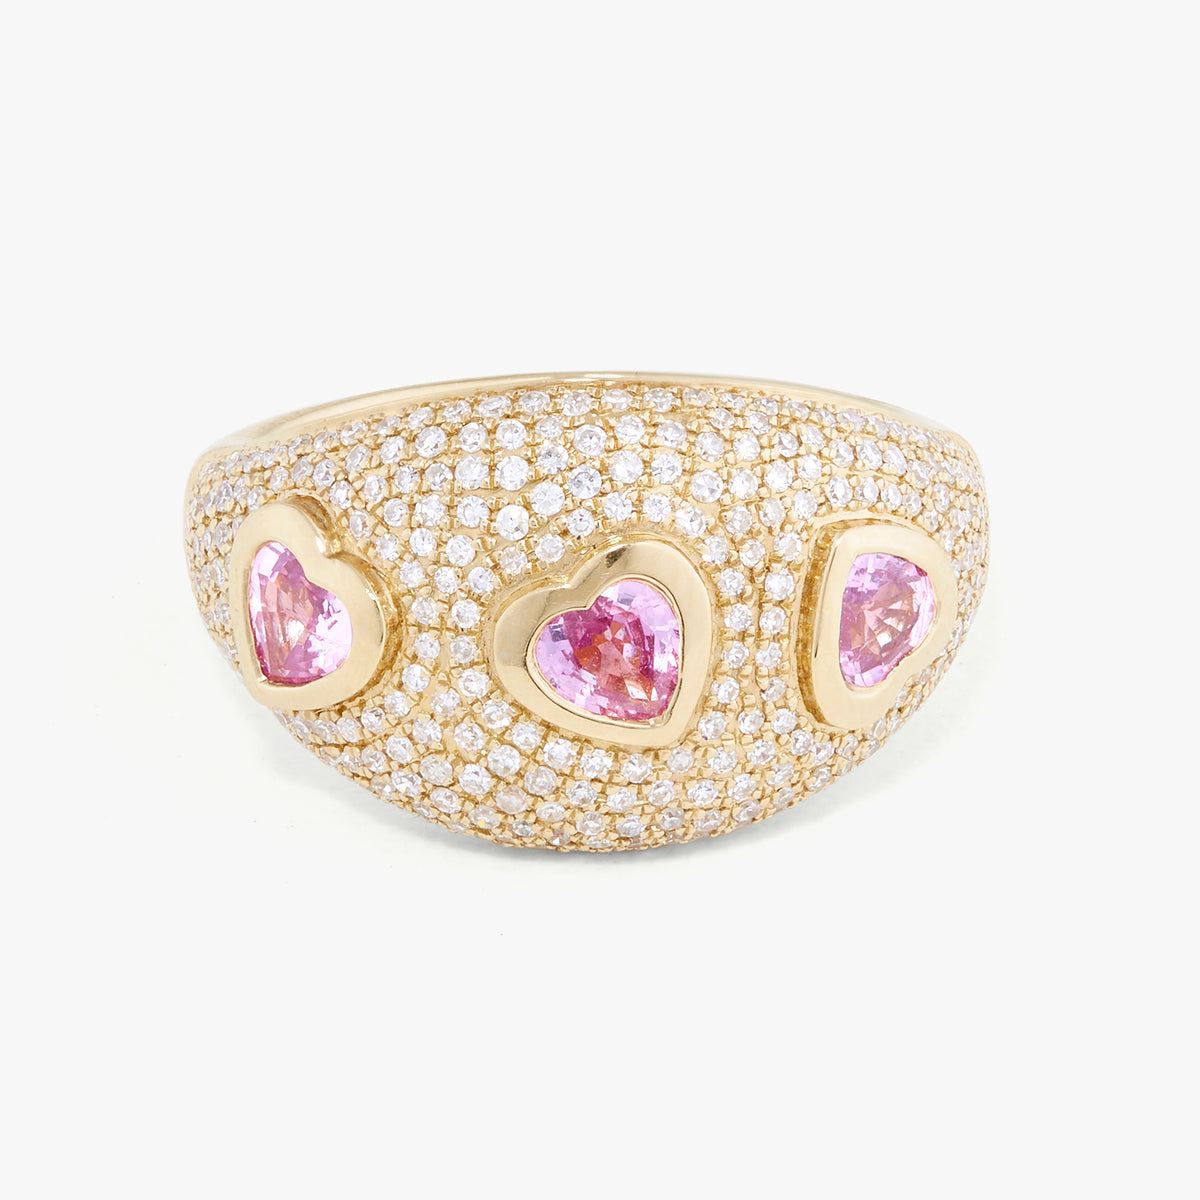 Queen of Hearts Pave Diamond Dome Ring